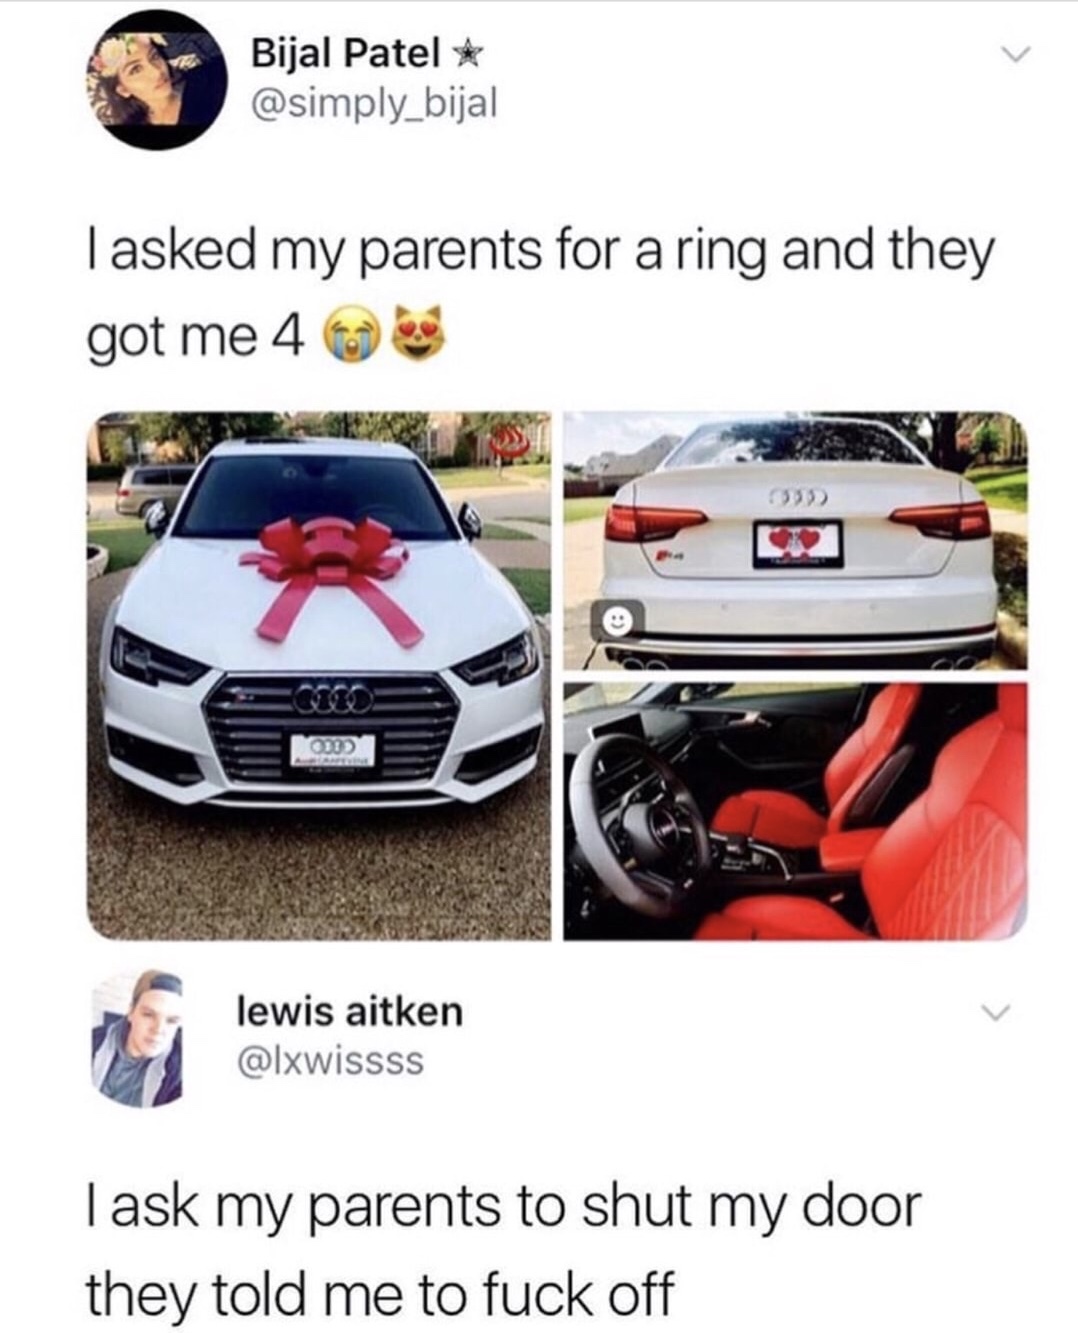 asked my parents for a ring they got me 4 - Bijal Patel I asked my parents for a ring and they got me 4 >> lewis aitken Task my parents to shut my door they told me to fuck off